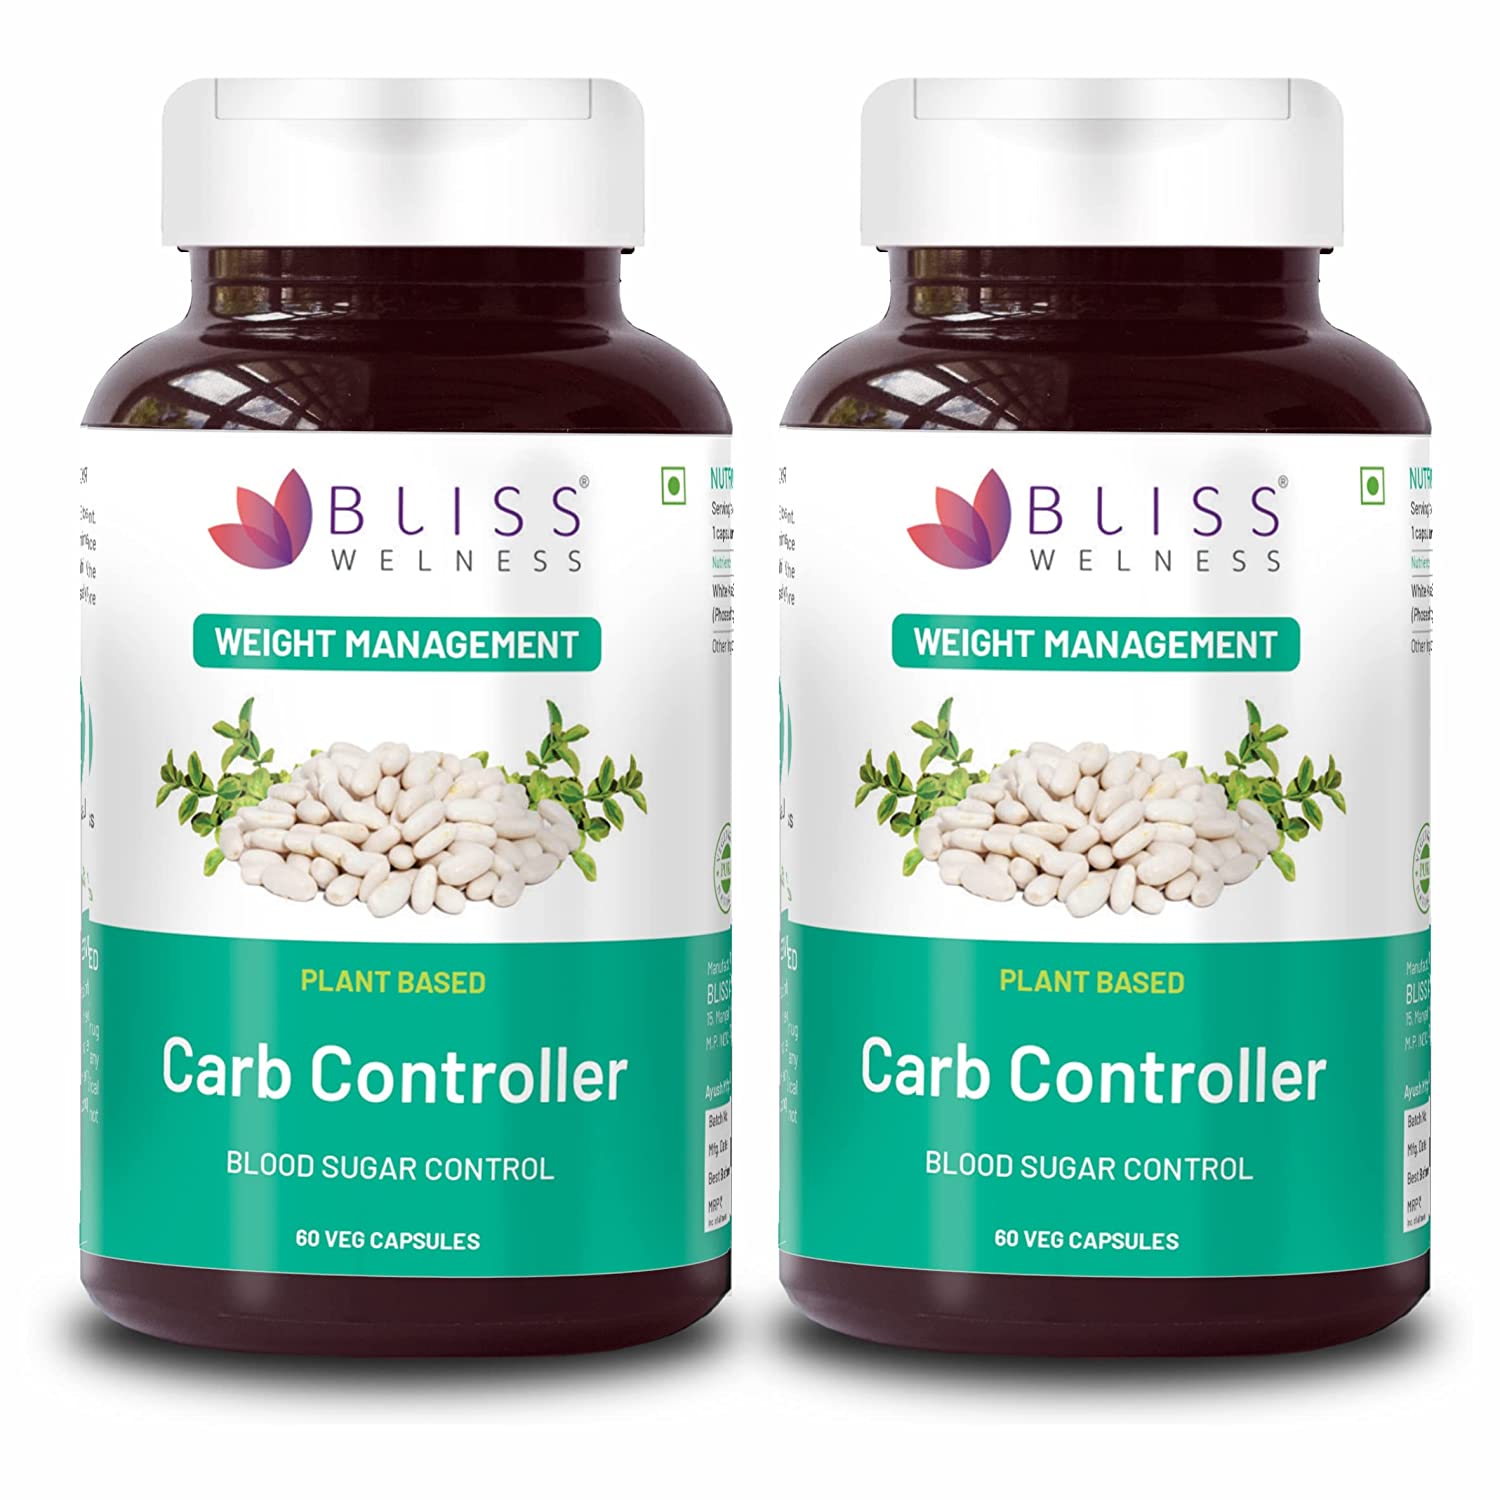 Bliss Welness Carb Blocker Inhibitor | Premium White Kidney Bean Extract | Carbohydrate Control Weight & Sugar Management Supplement ( Pack of 2 )